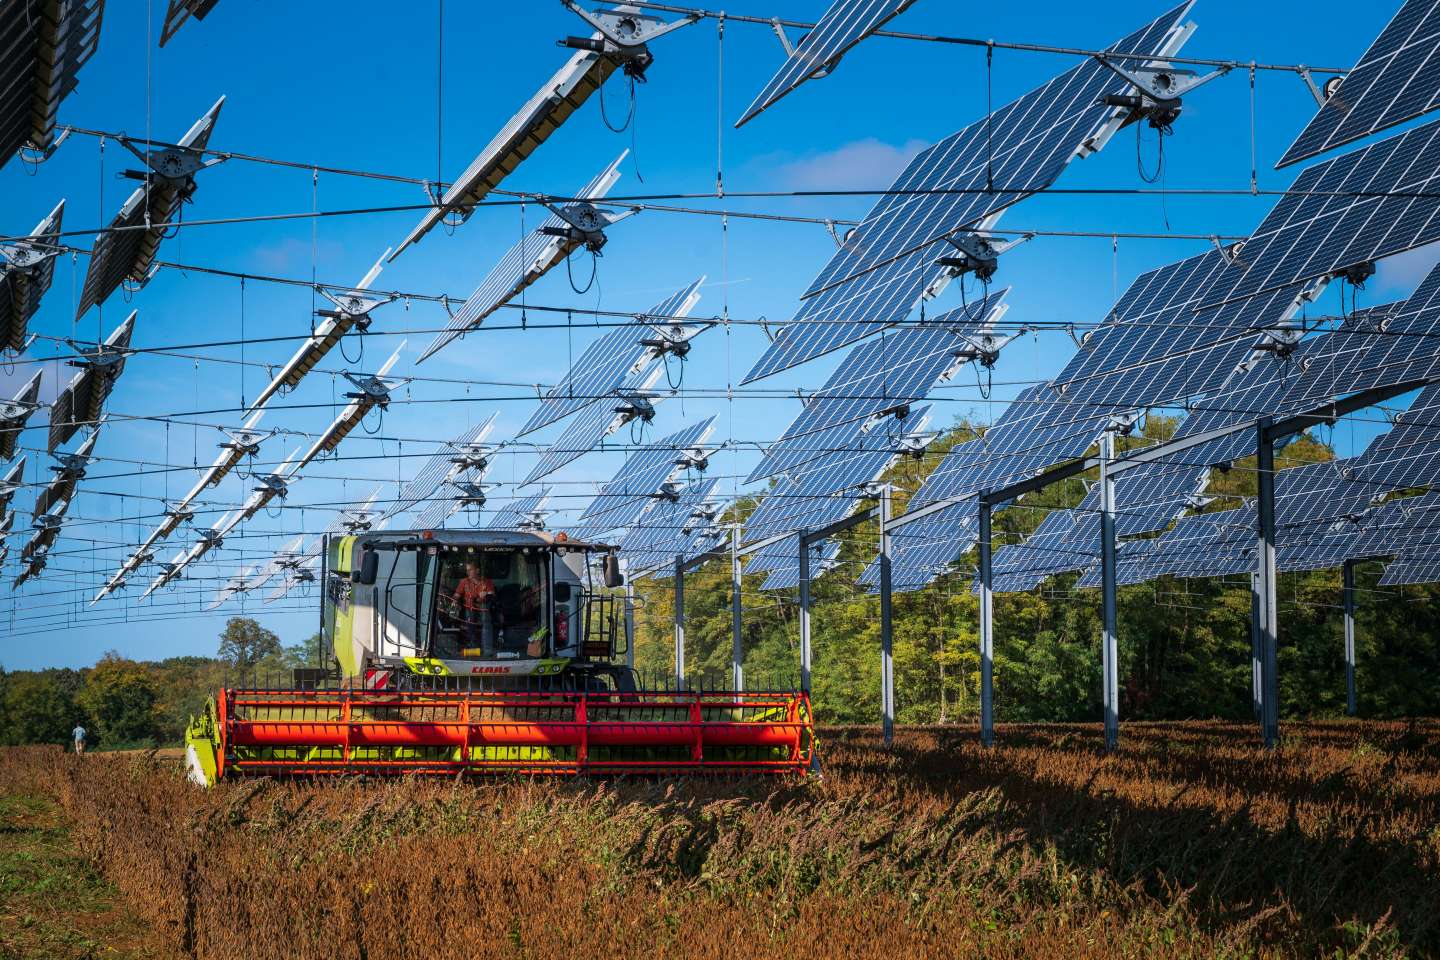 In Haute-Saône, agrivoltaism, or solar energy in the countryside